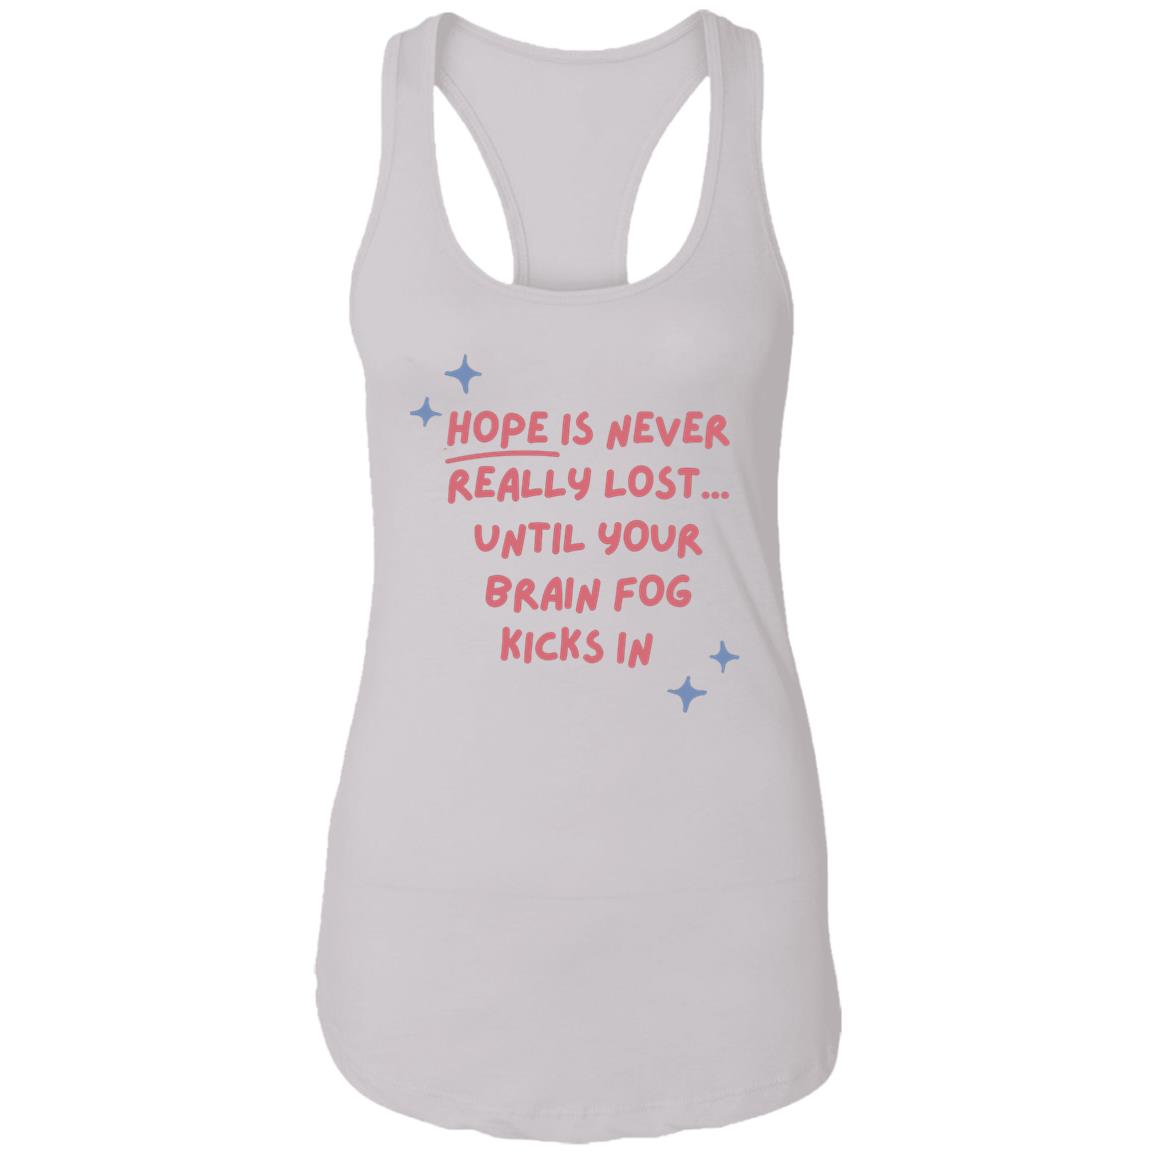 Hope Is Never Really Lost... Racerback Tank